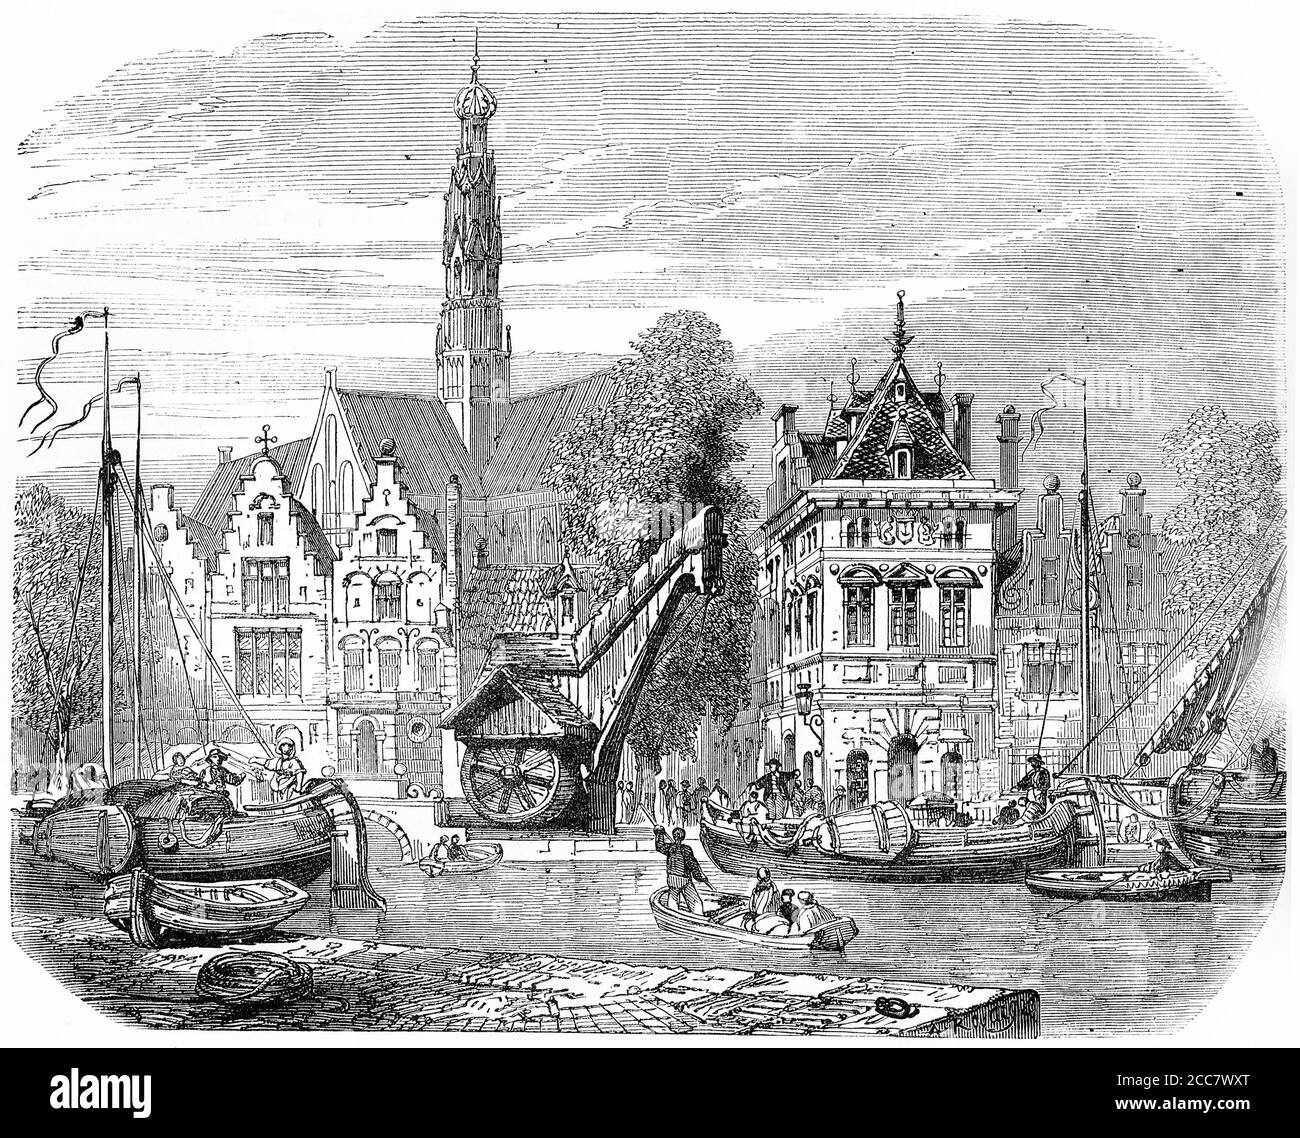 Engraving of the corn market in Haarlem, Netherlands, circa 1570, illustration from 'The history of Protestantism' by James Aitken Wylie (1808-1890), pub. 1878 Stock Photo